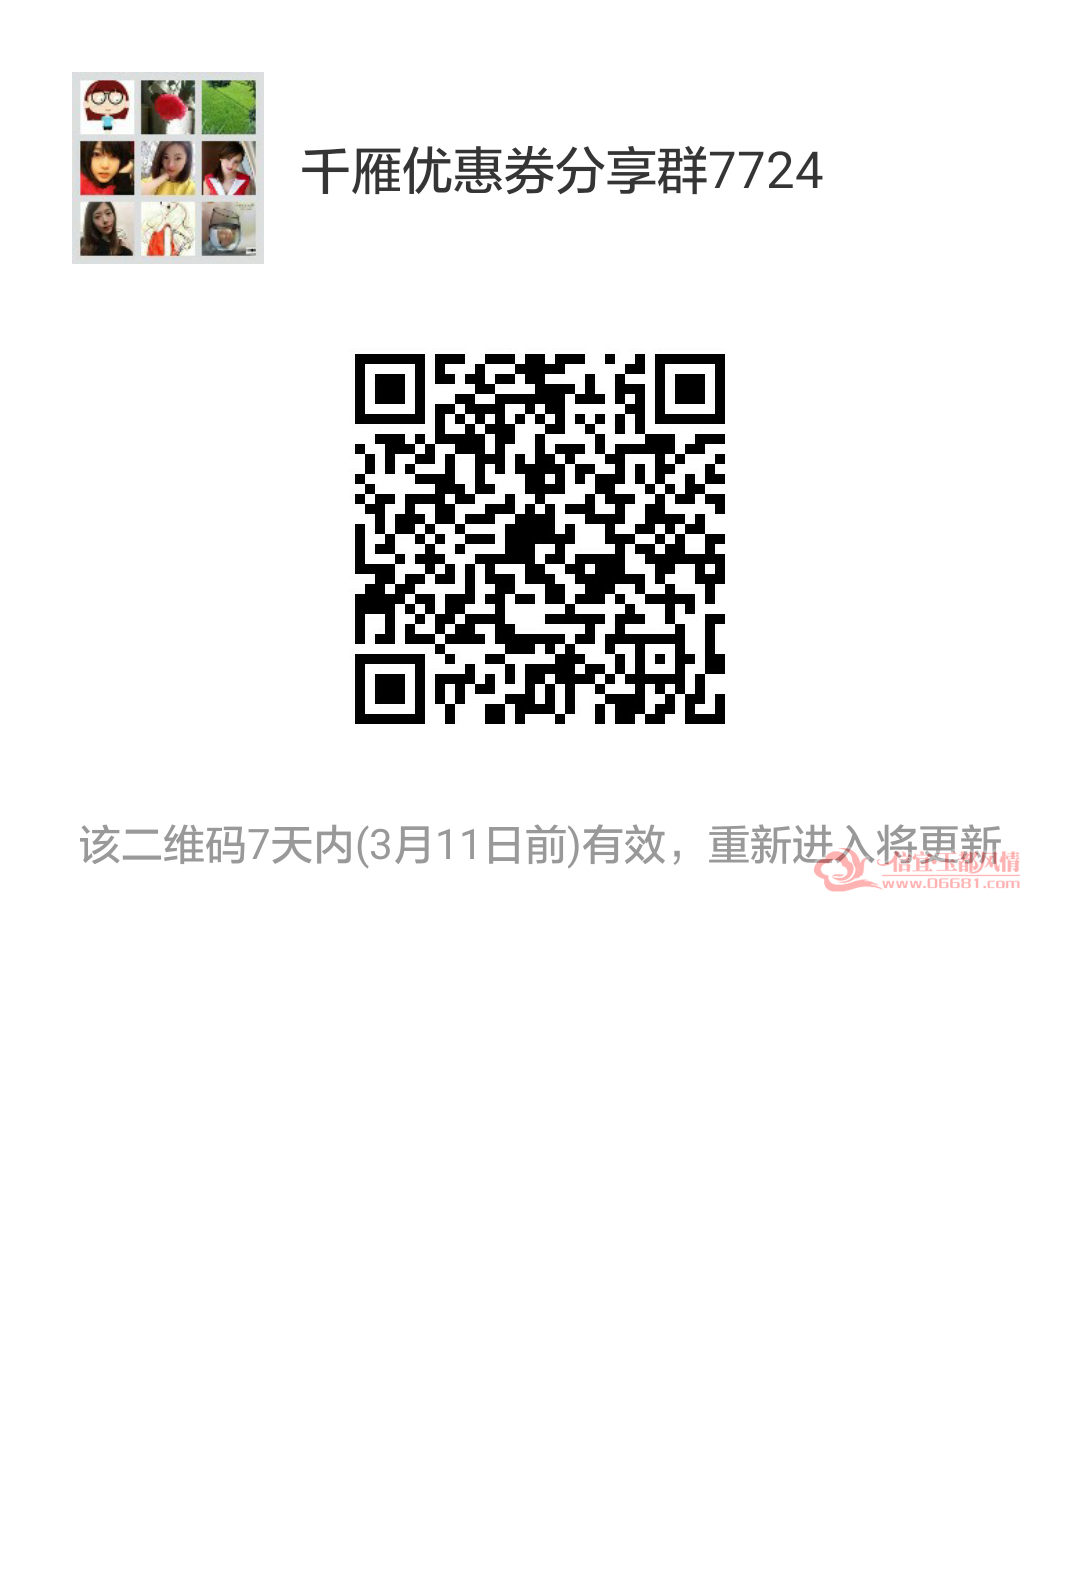 mmqrcode1488627067488.png